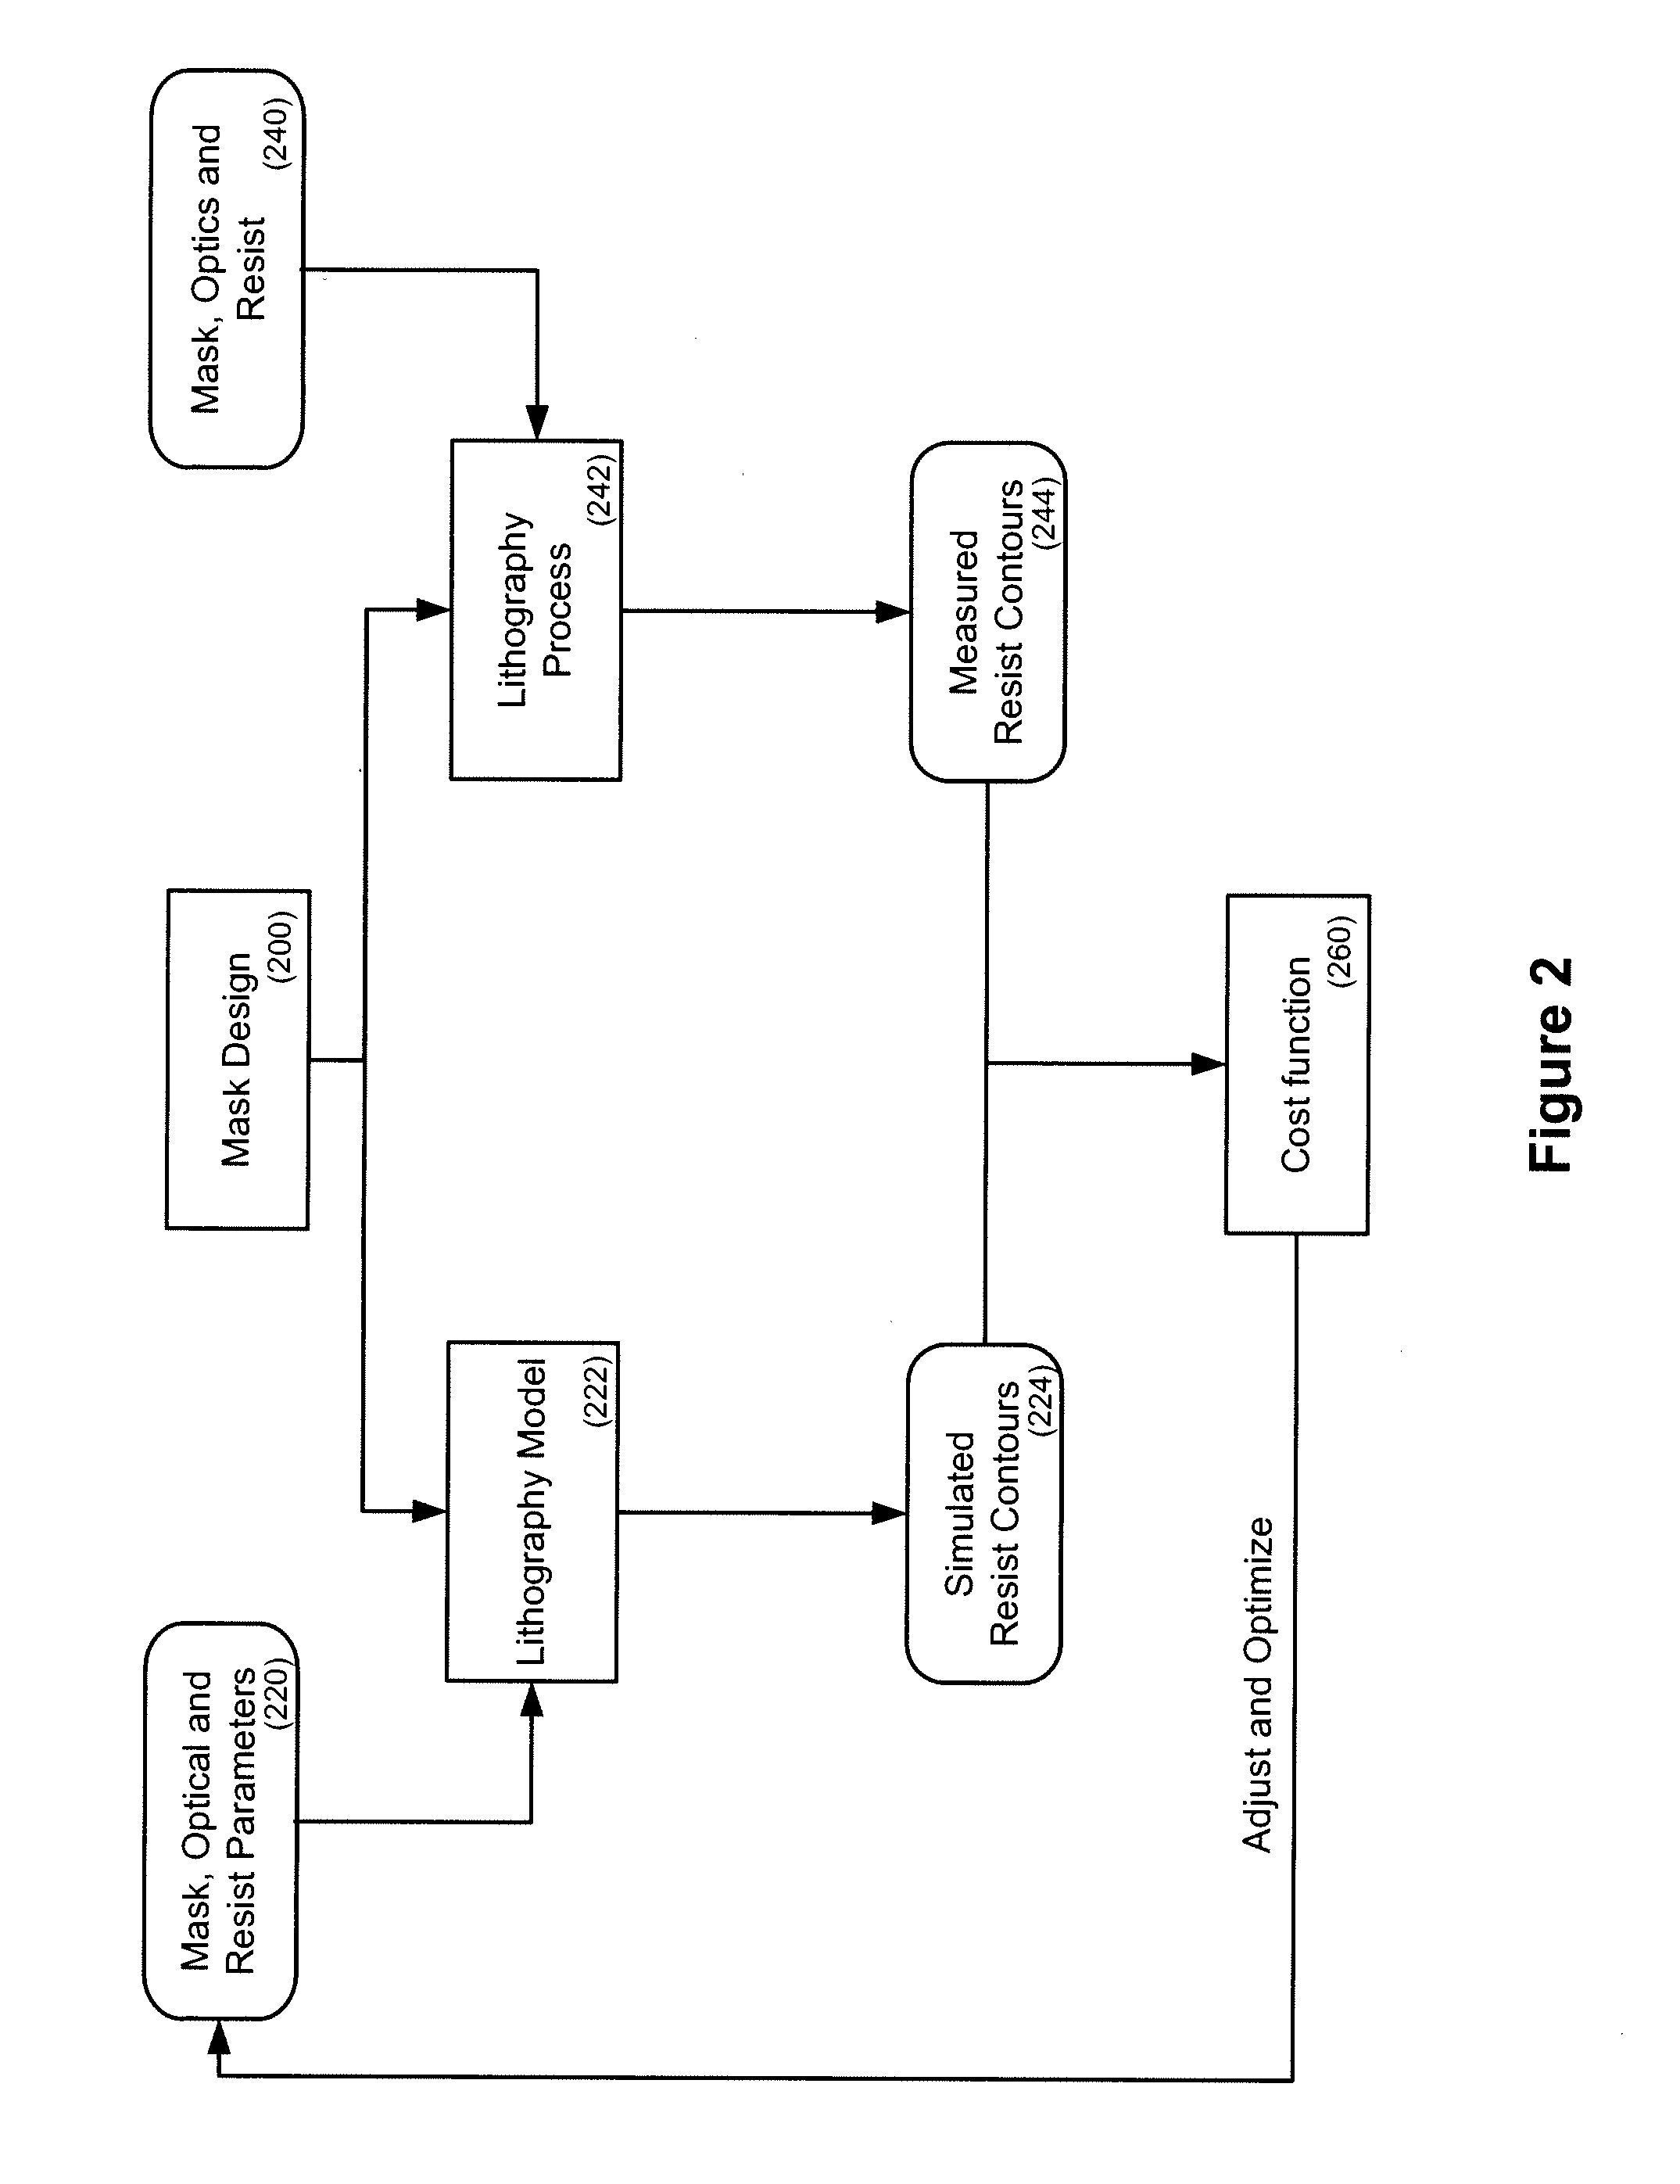 Model-based process simulation systems and methods